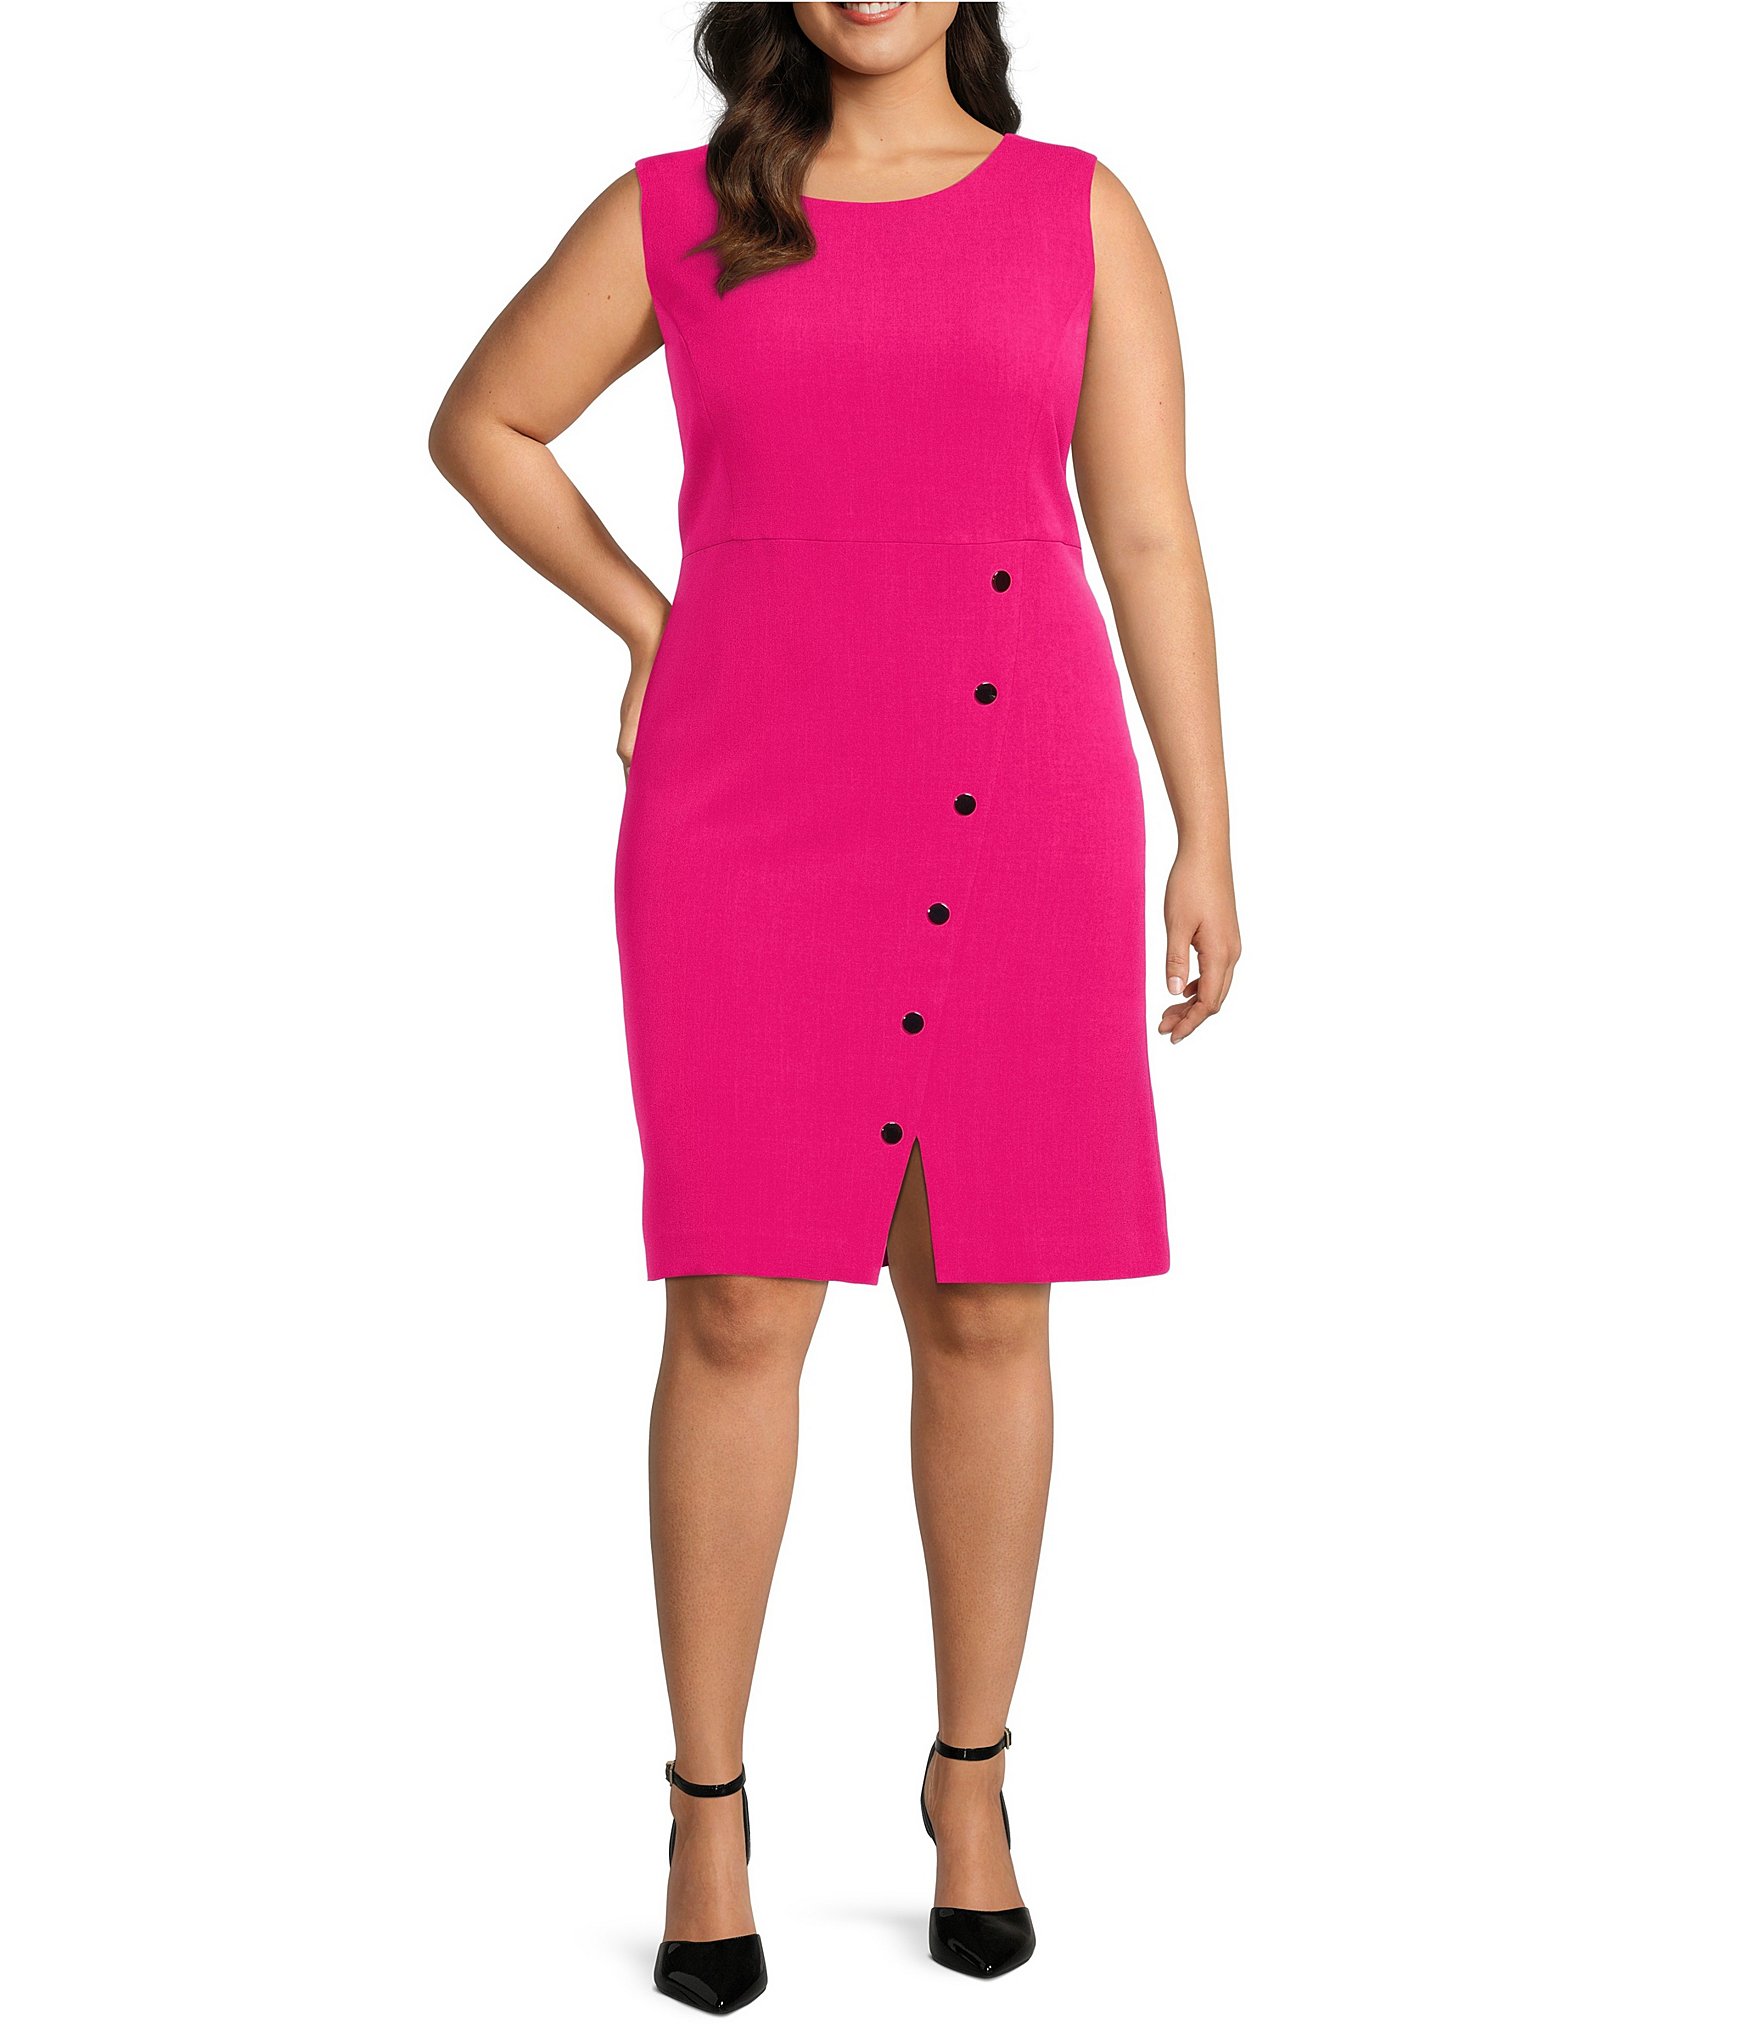 Kasper Plus Size Pretty in Pink Suit Separates Collection